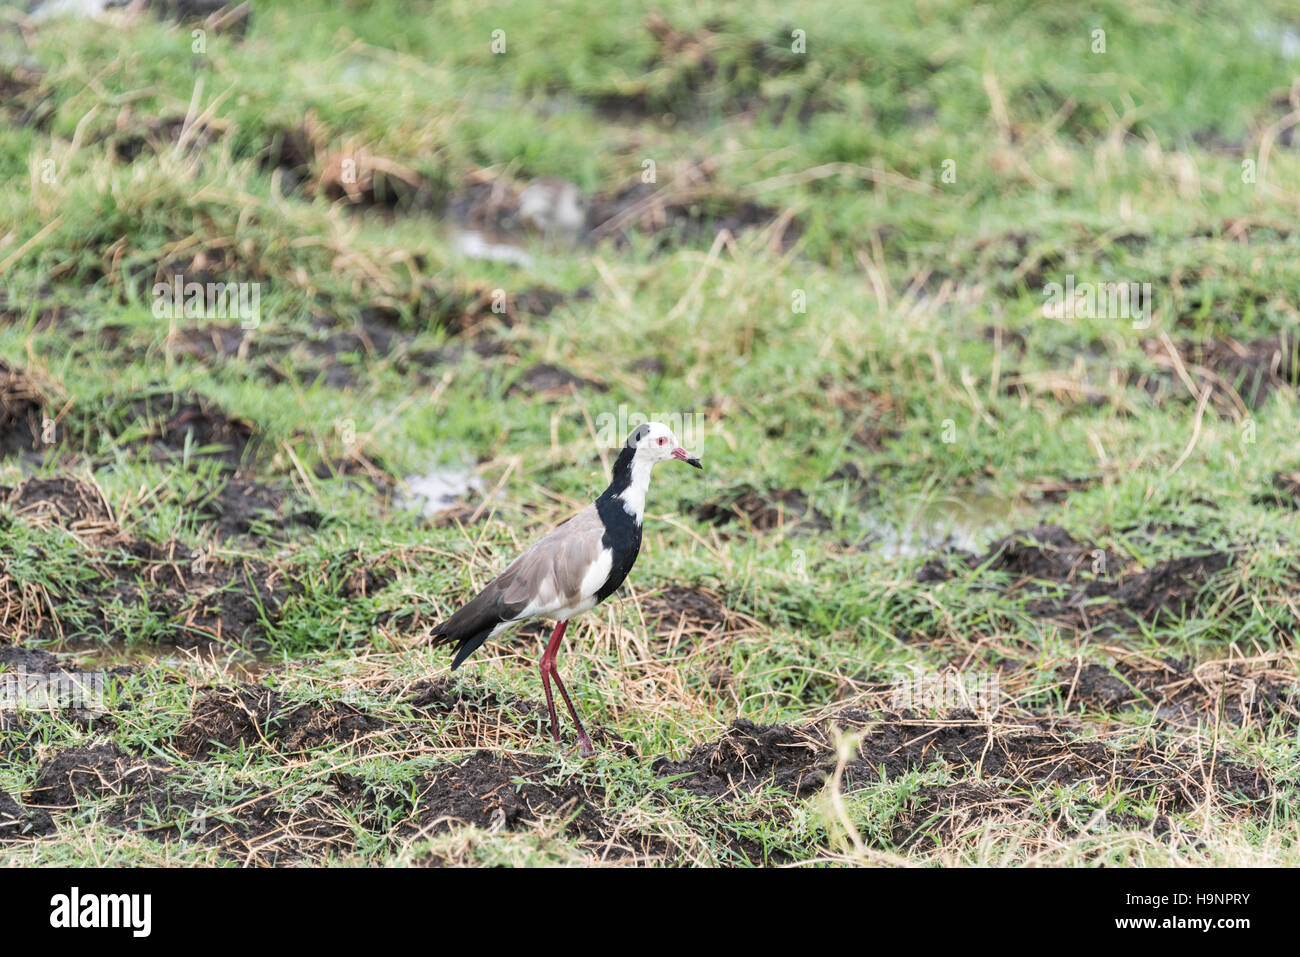 A Long-toed Plover standing in a marsh Stock Photo